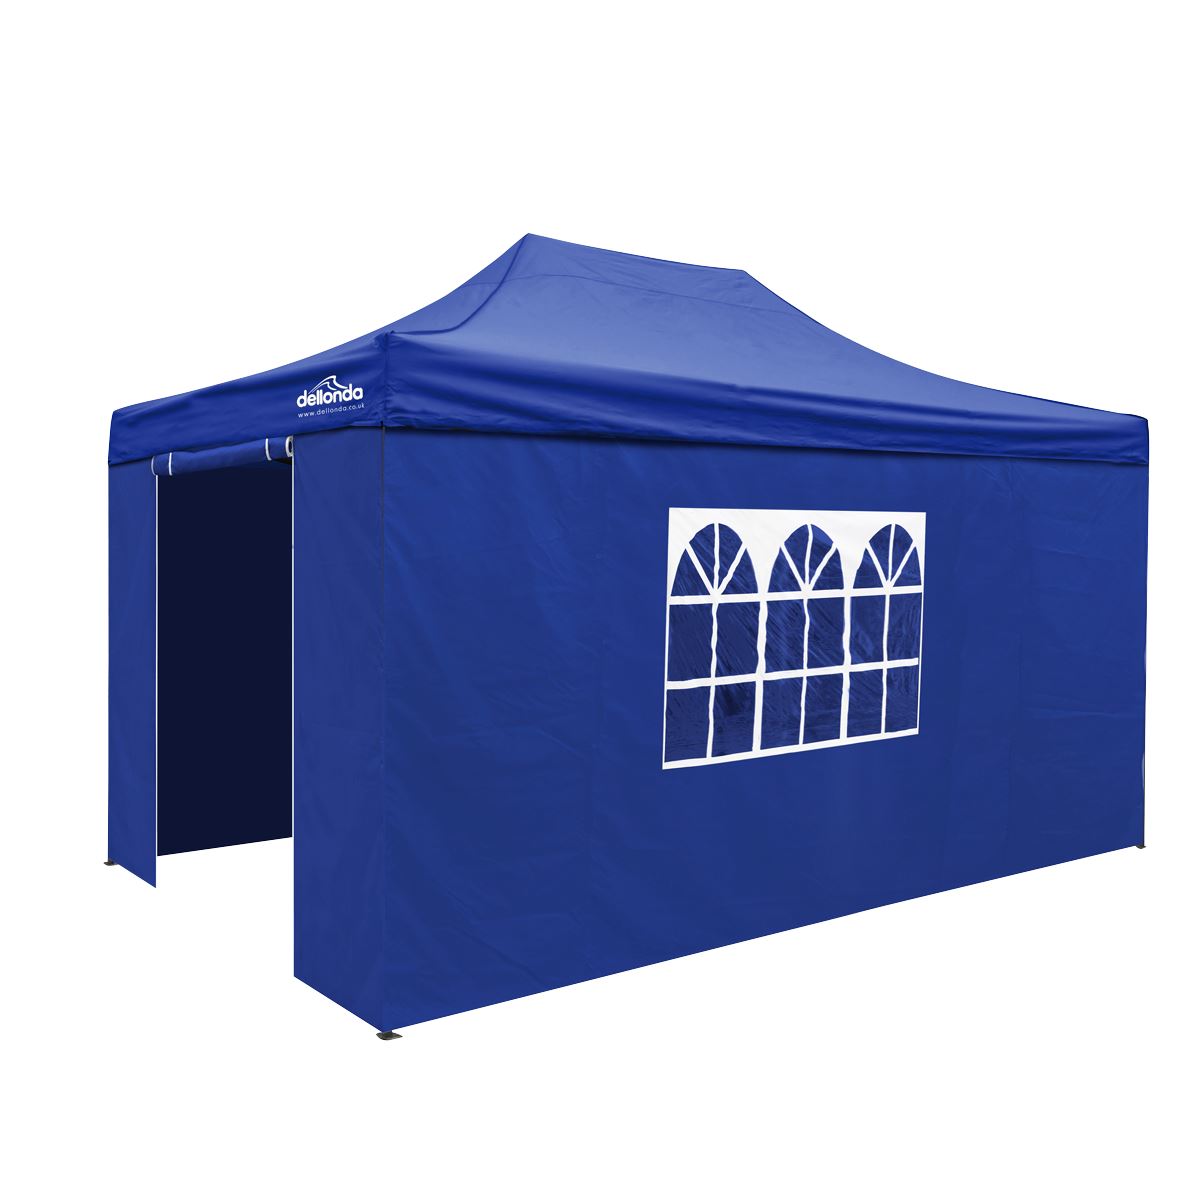 Dellonda Premium 3x4.5m Pop-Up Gazebo & Side Walls, PVC Coated, Water Resistant Fabric with Carry Bag, Rope, Stakes & Weight Bags - Blue